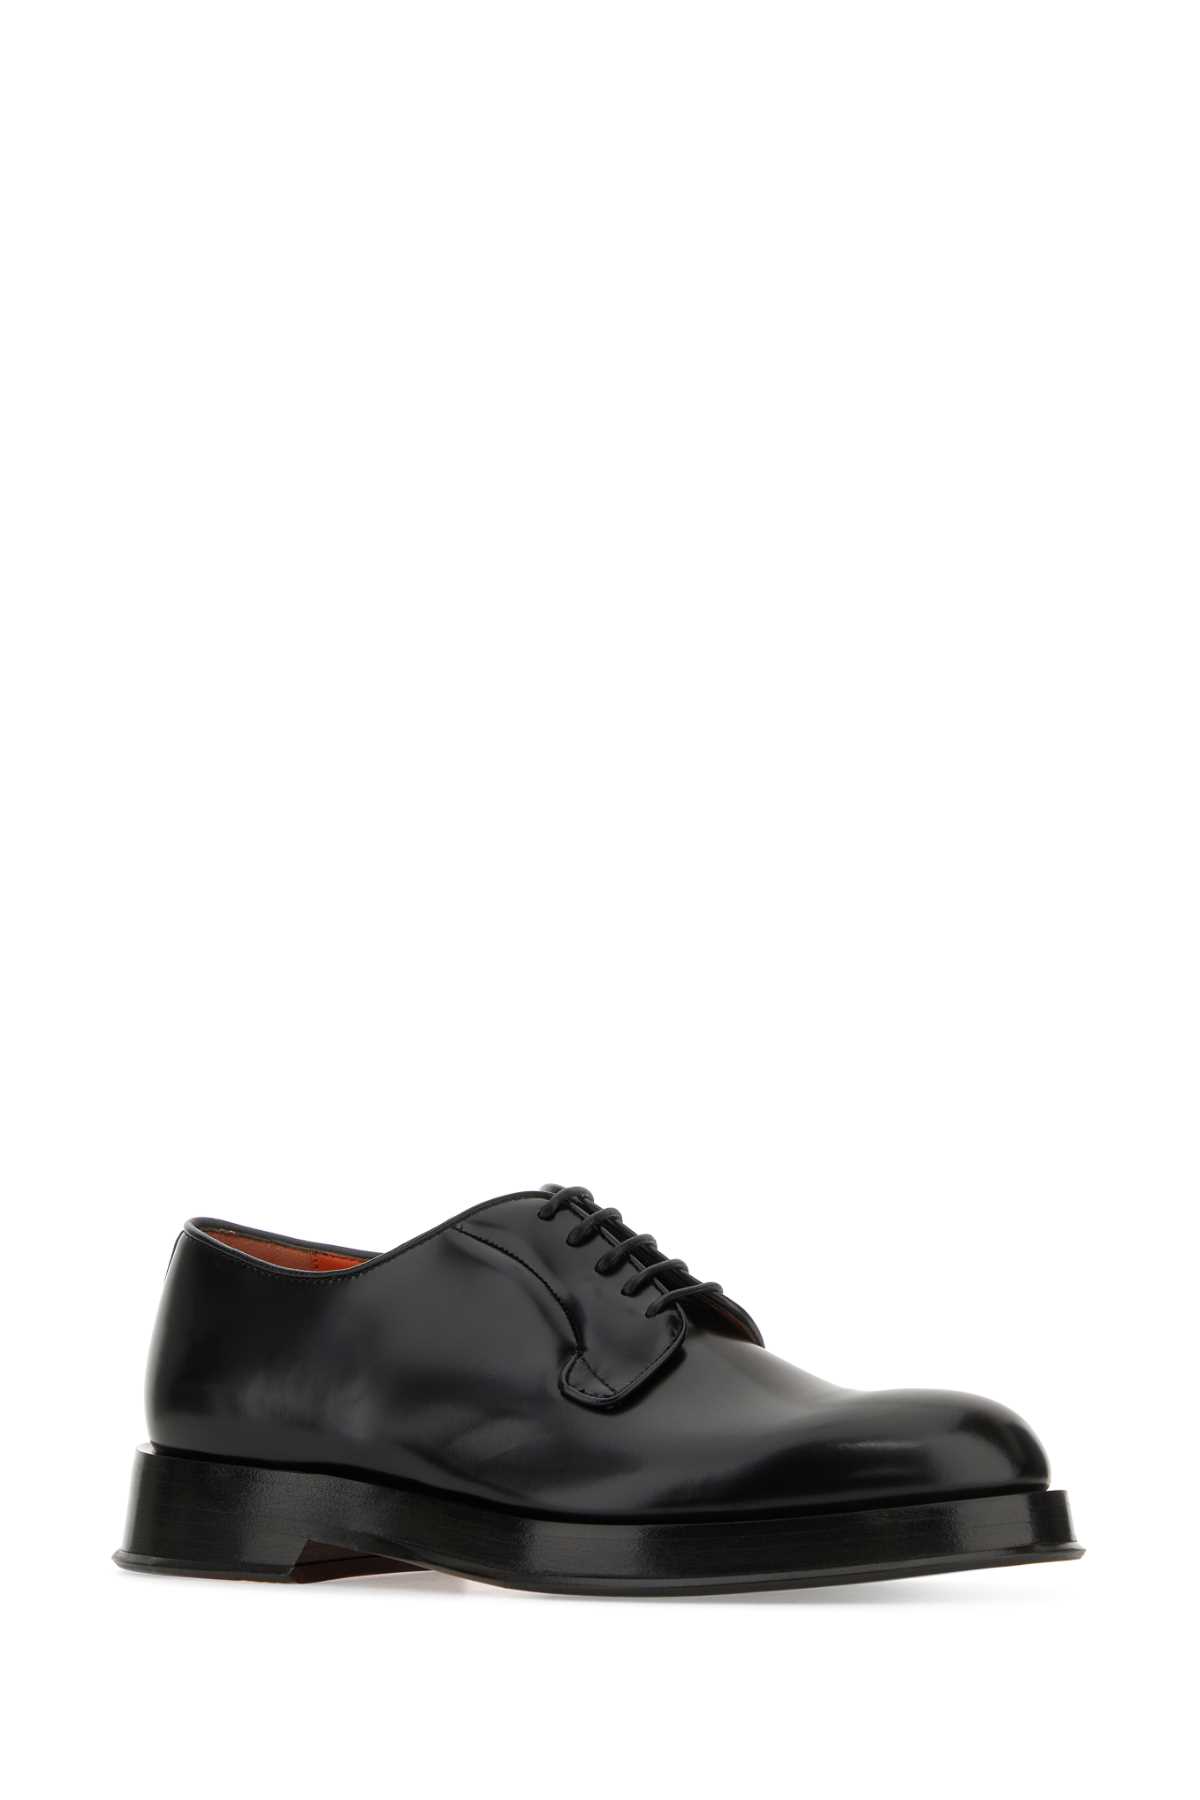 Santoni Black Leather Lace-up Shoes In Nero